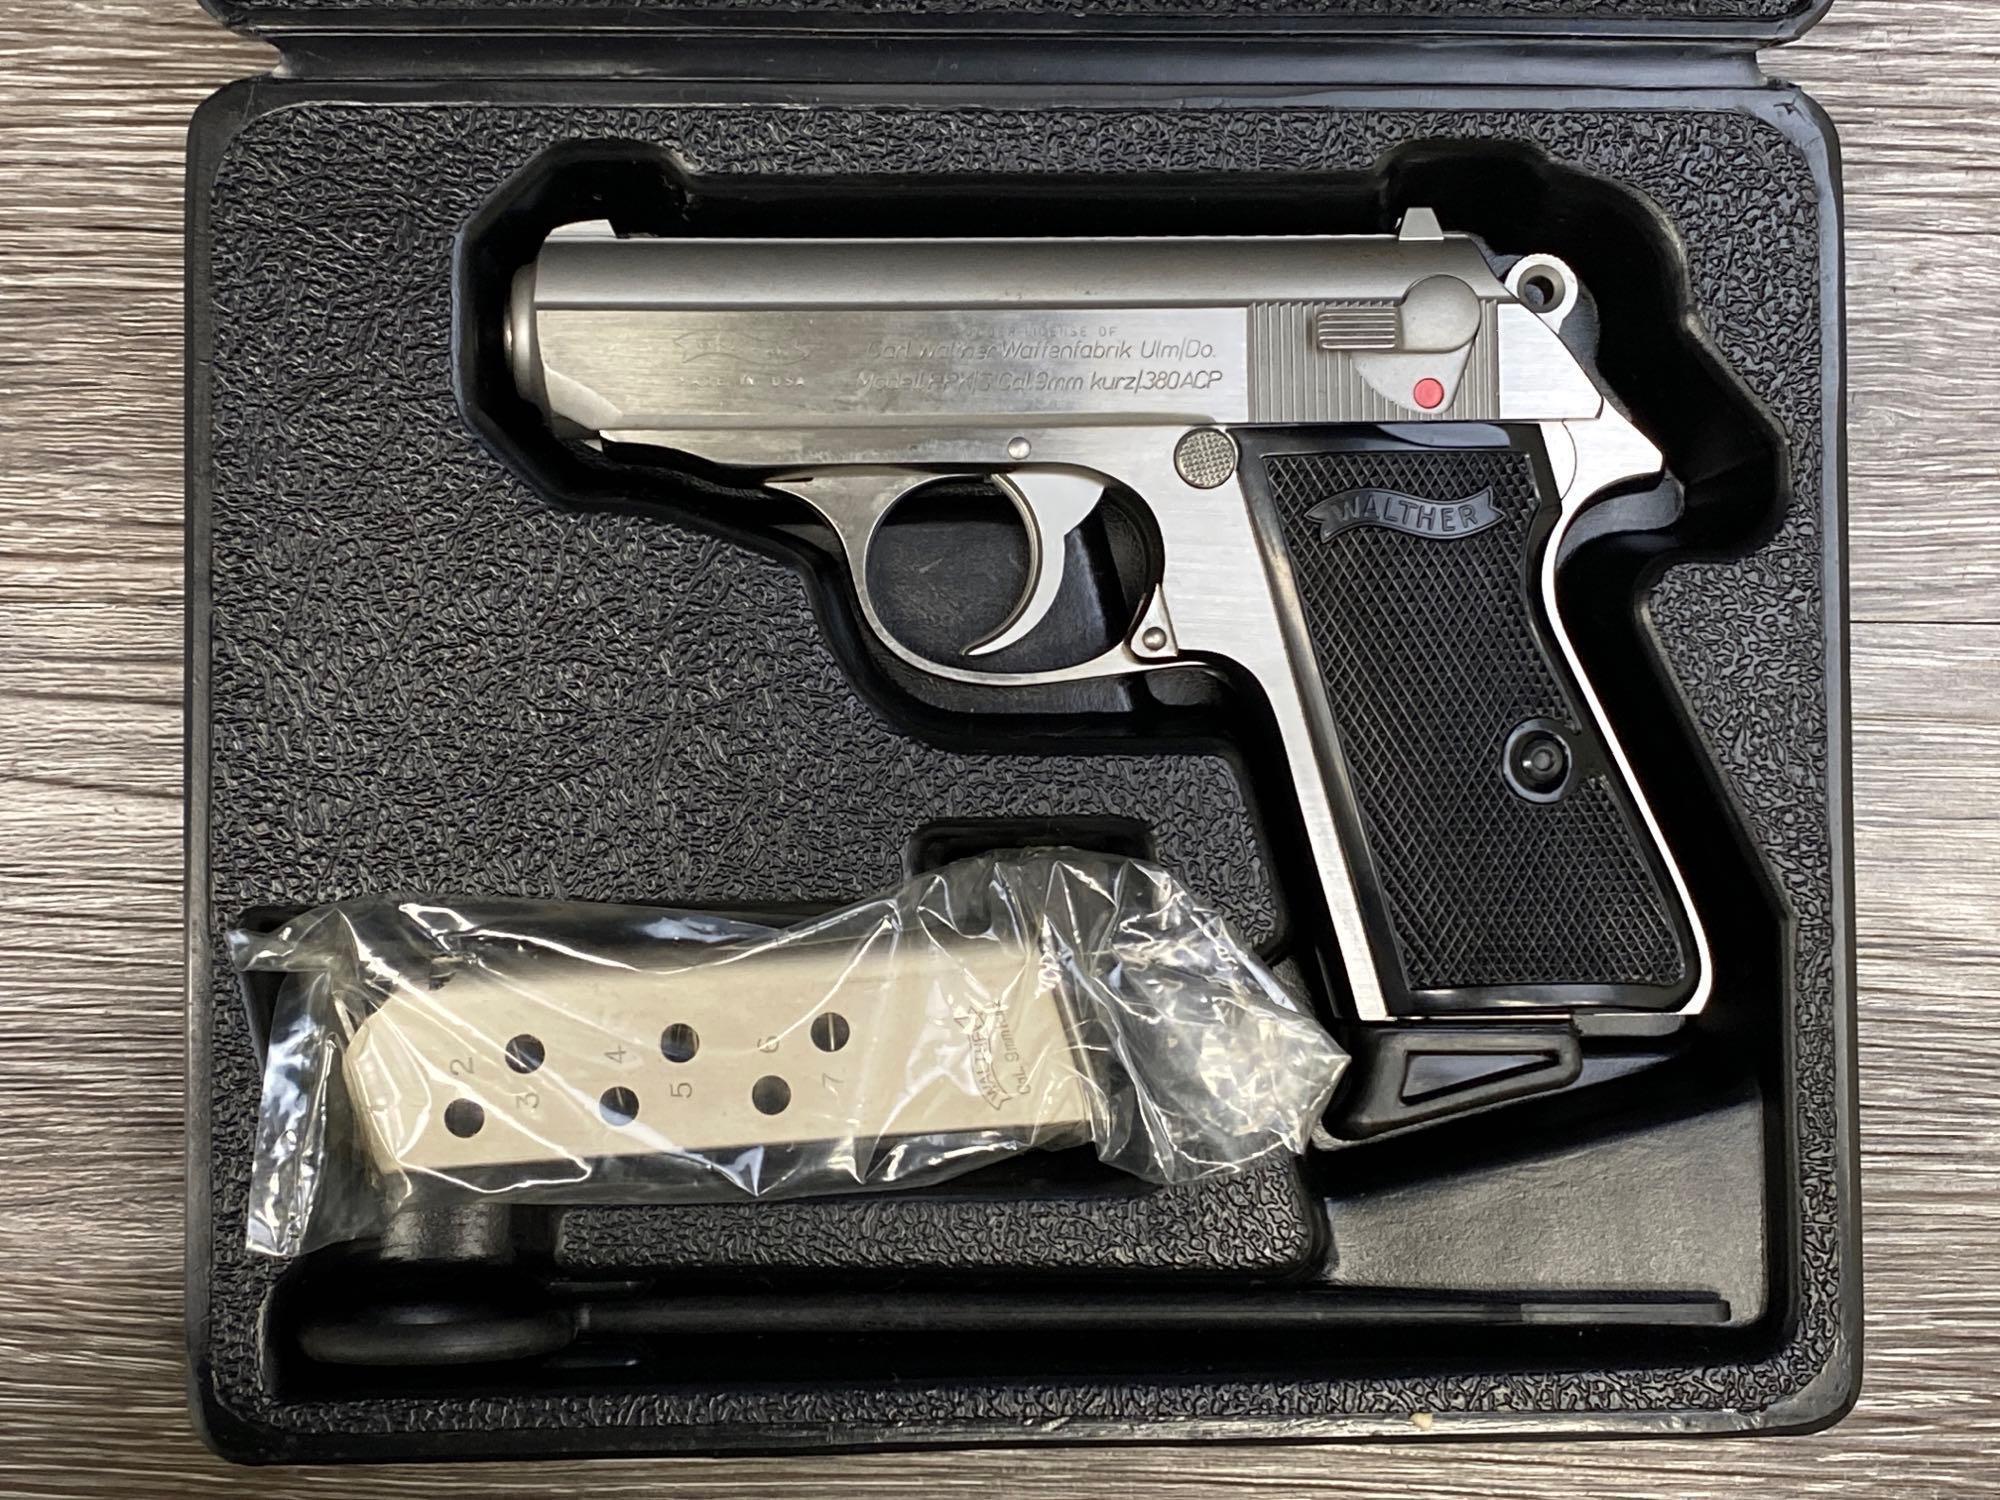 BOXED WALTHER PPK/S STAINLESS STEEL .380 ACP SEMI-AUTO PISTOL